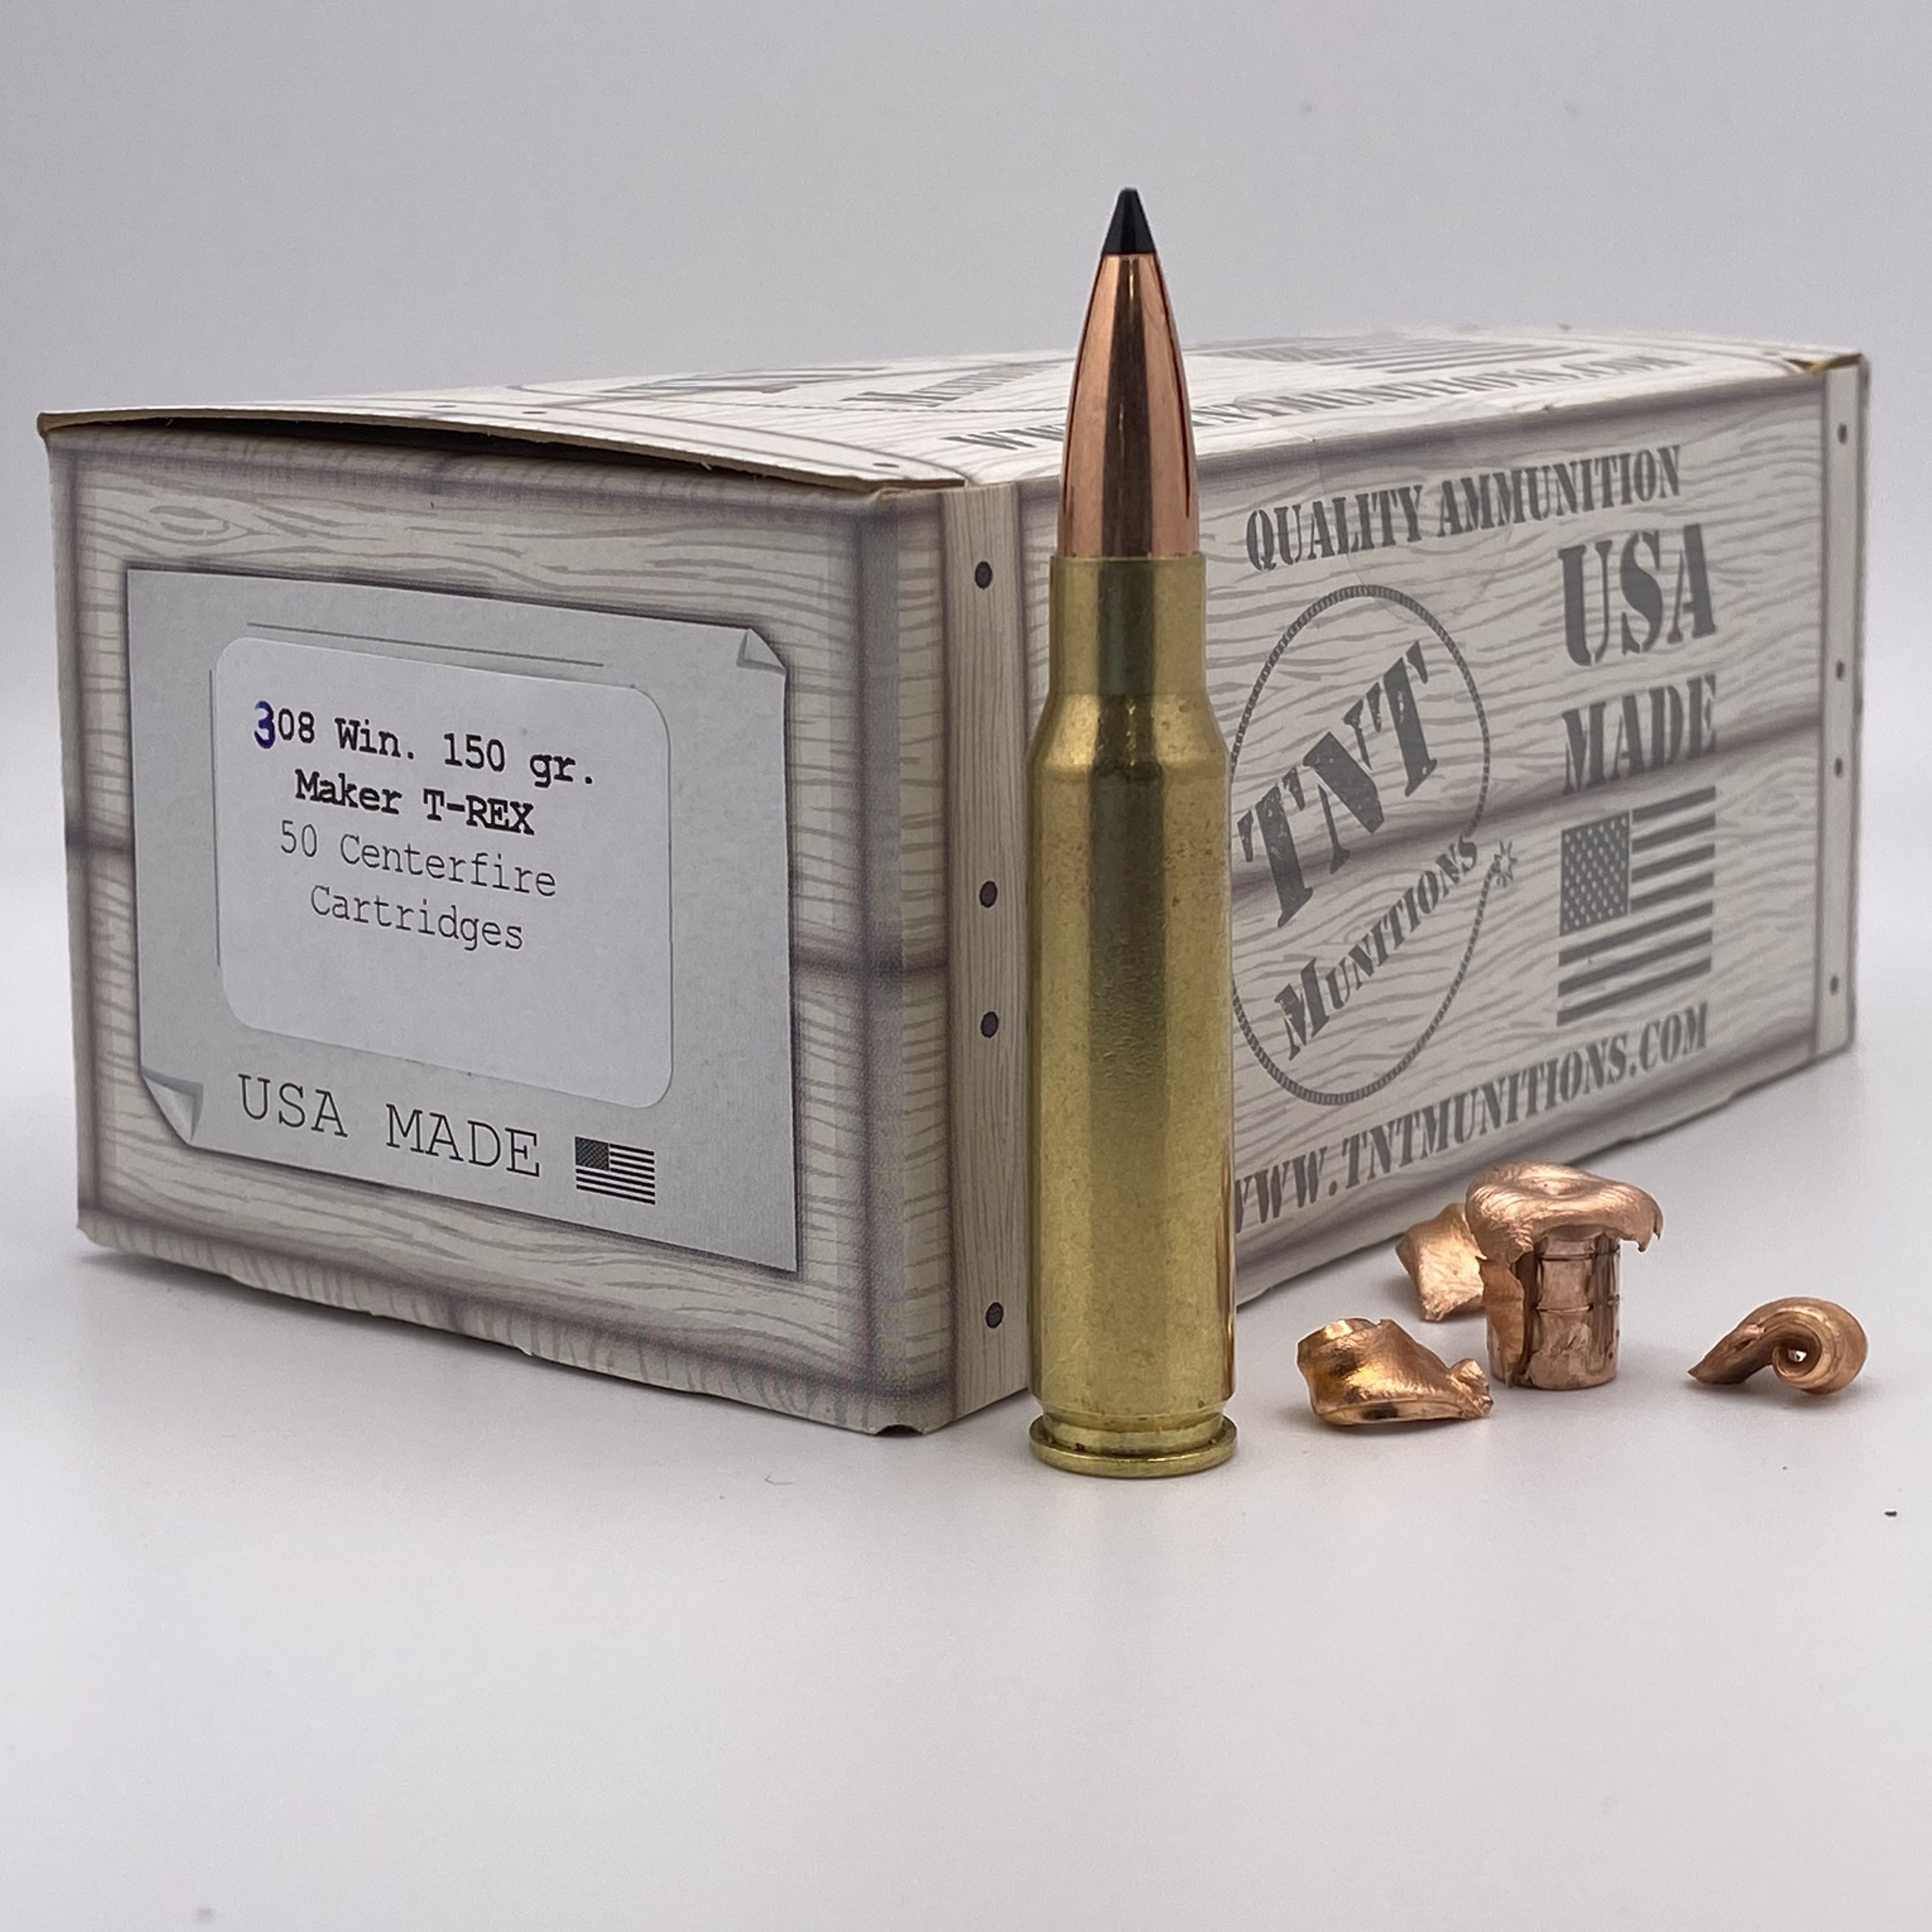 .308 Win. 150 gr. Maker T-REX. MEMORIAL DAY SALE! THROUGH MAY 29TH ONLY - SHIPS NBD  - (LEAD-FREE)